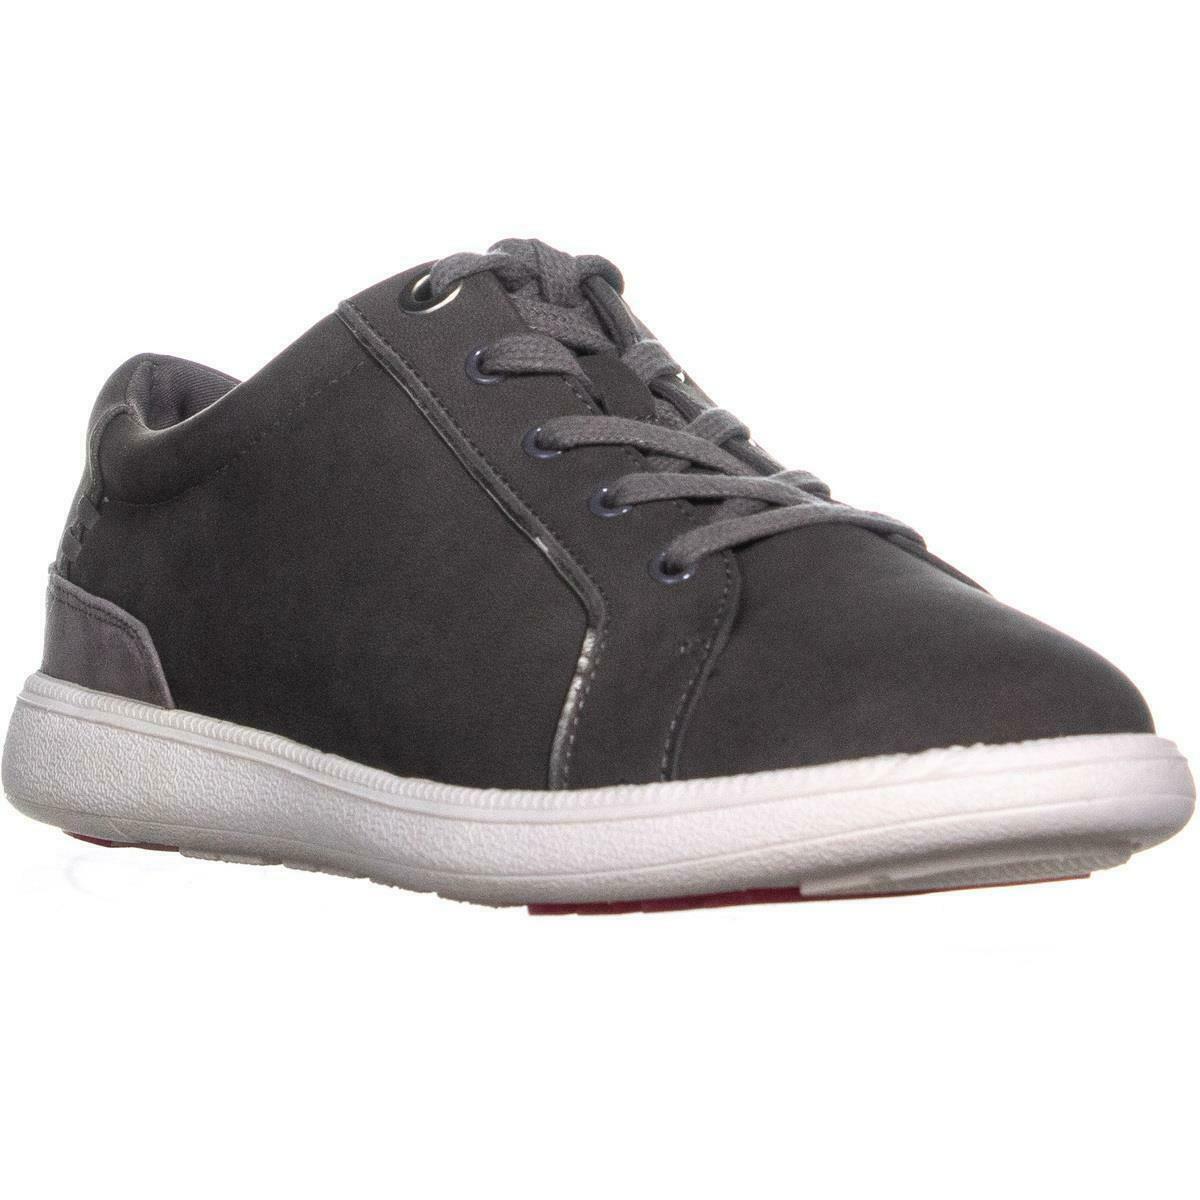 Foot Petals Andi Low-Top Lace-Up Sneakers, Grey, 7 US - Athletic